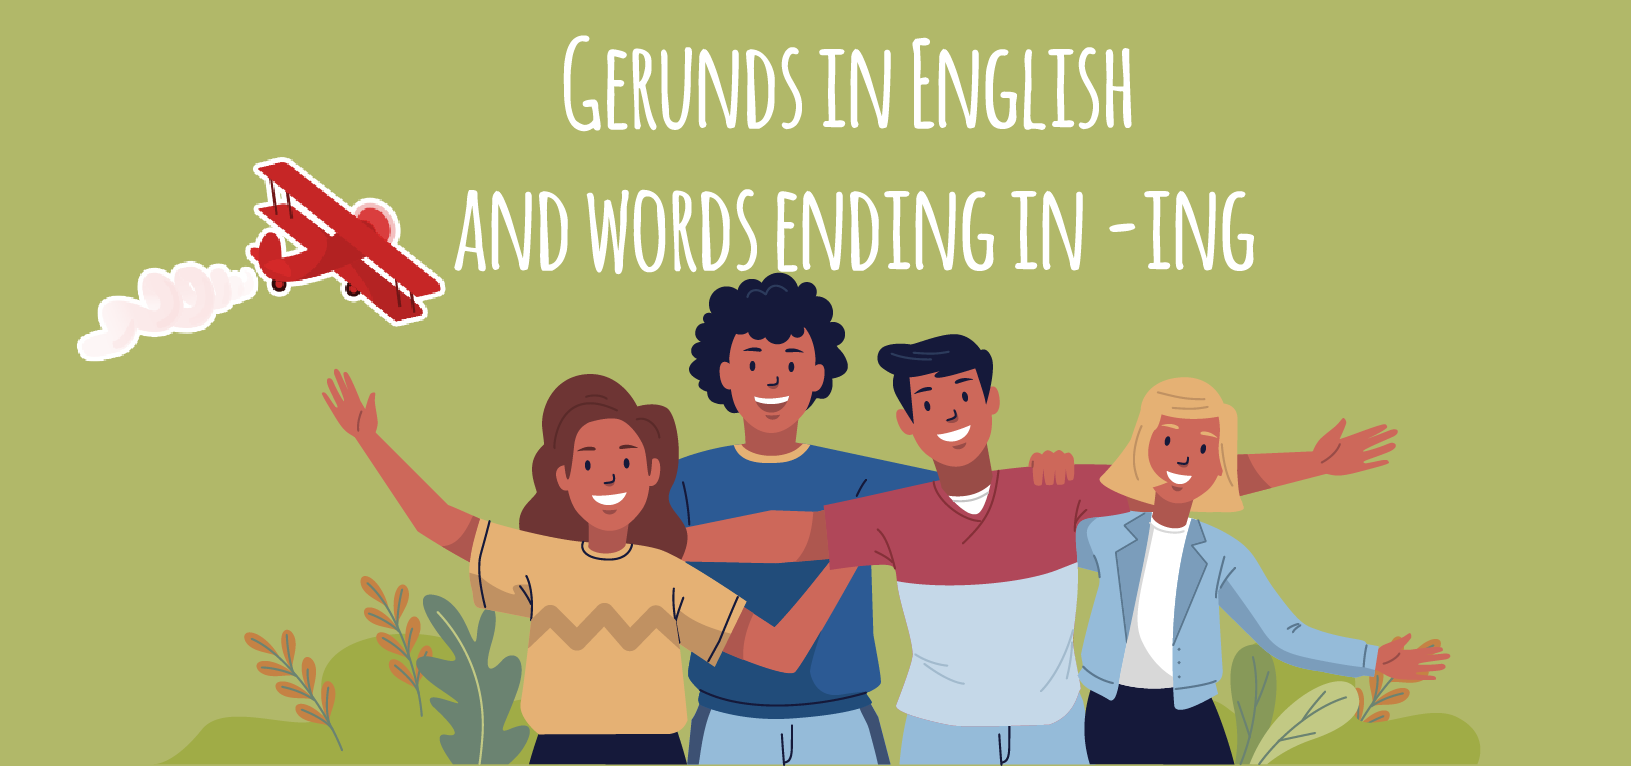 gerunds-in-english-and-words-ending-in-ing-elblogdeidiomas-es